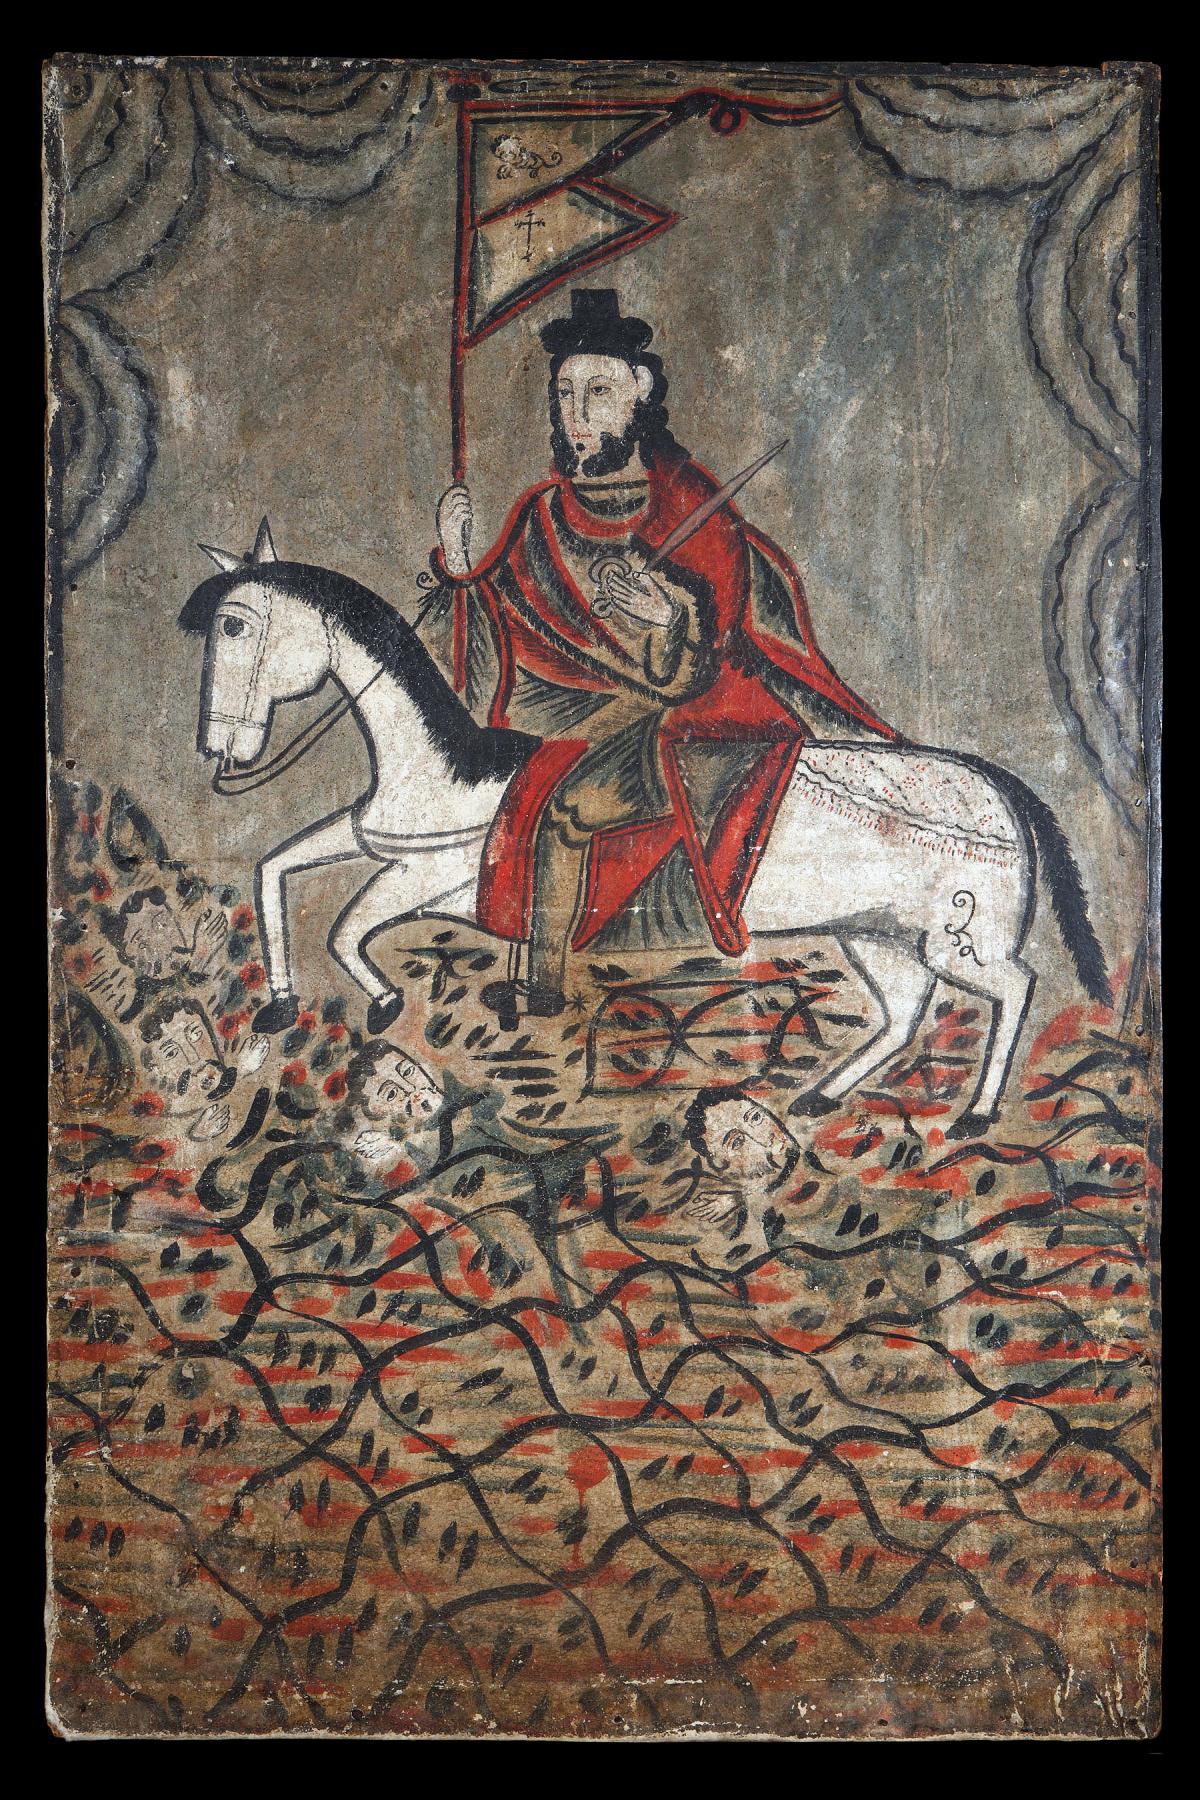 saint james riding a white horse, wearing a red cloak and holding a sword over his shoulder